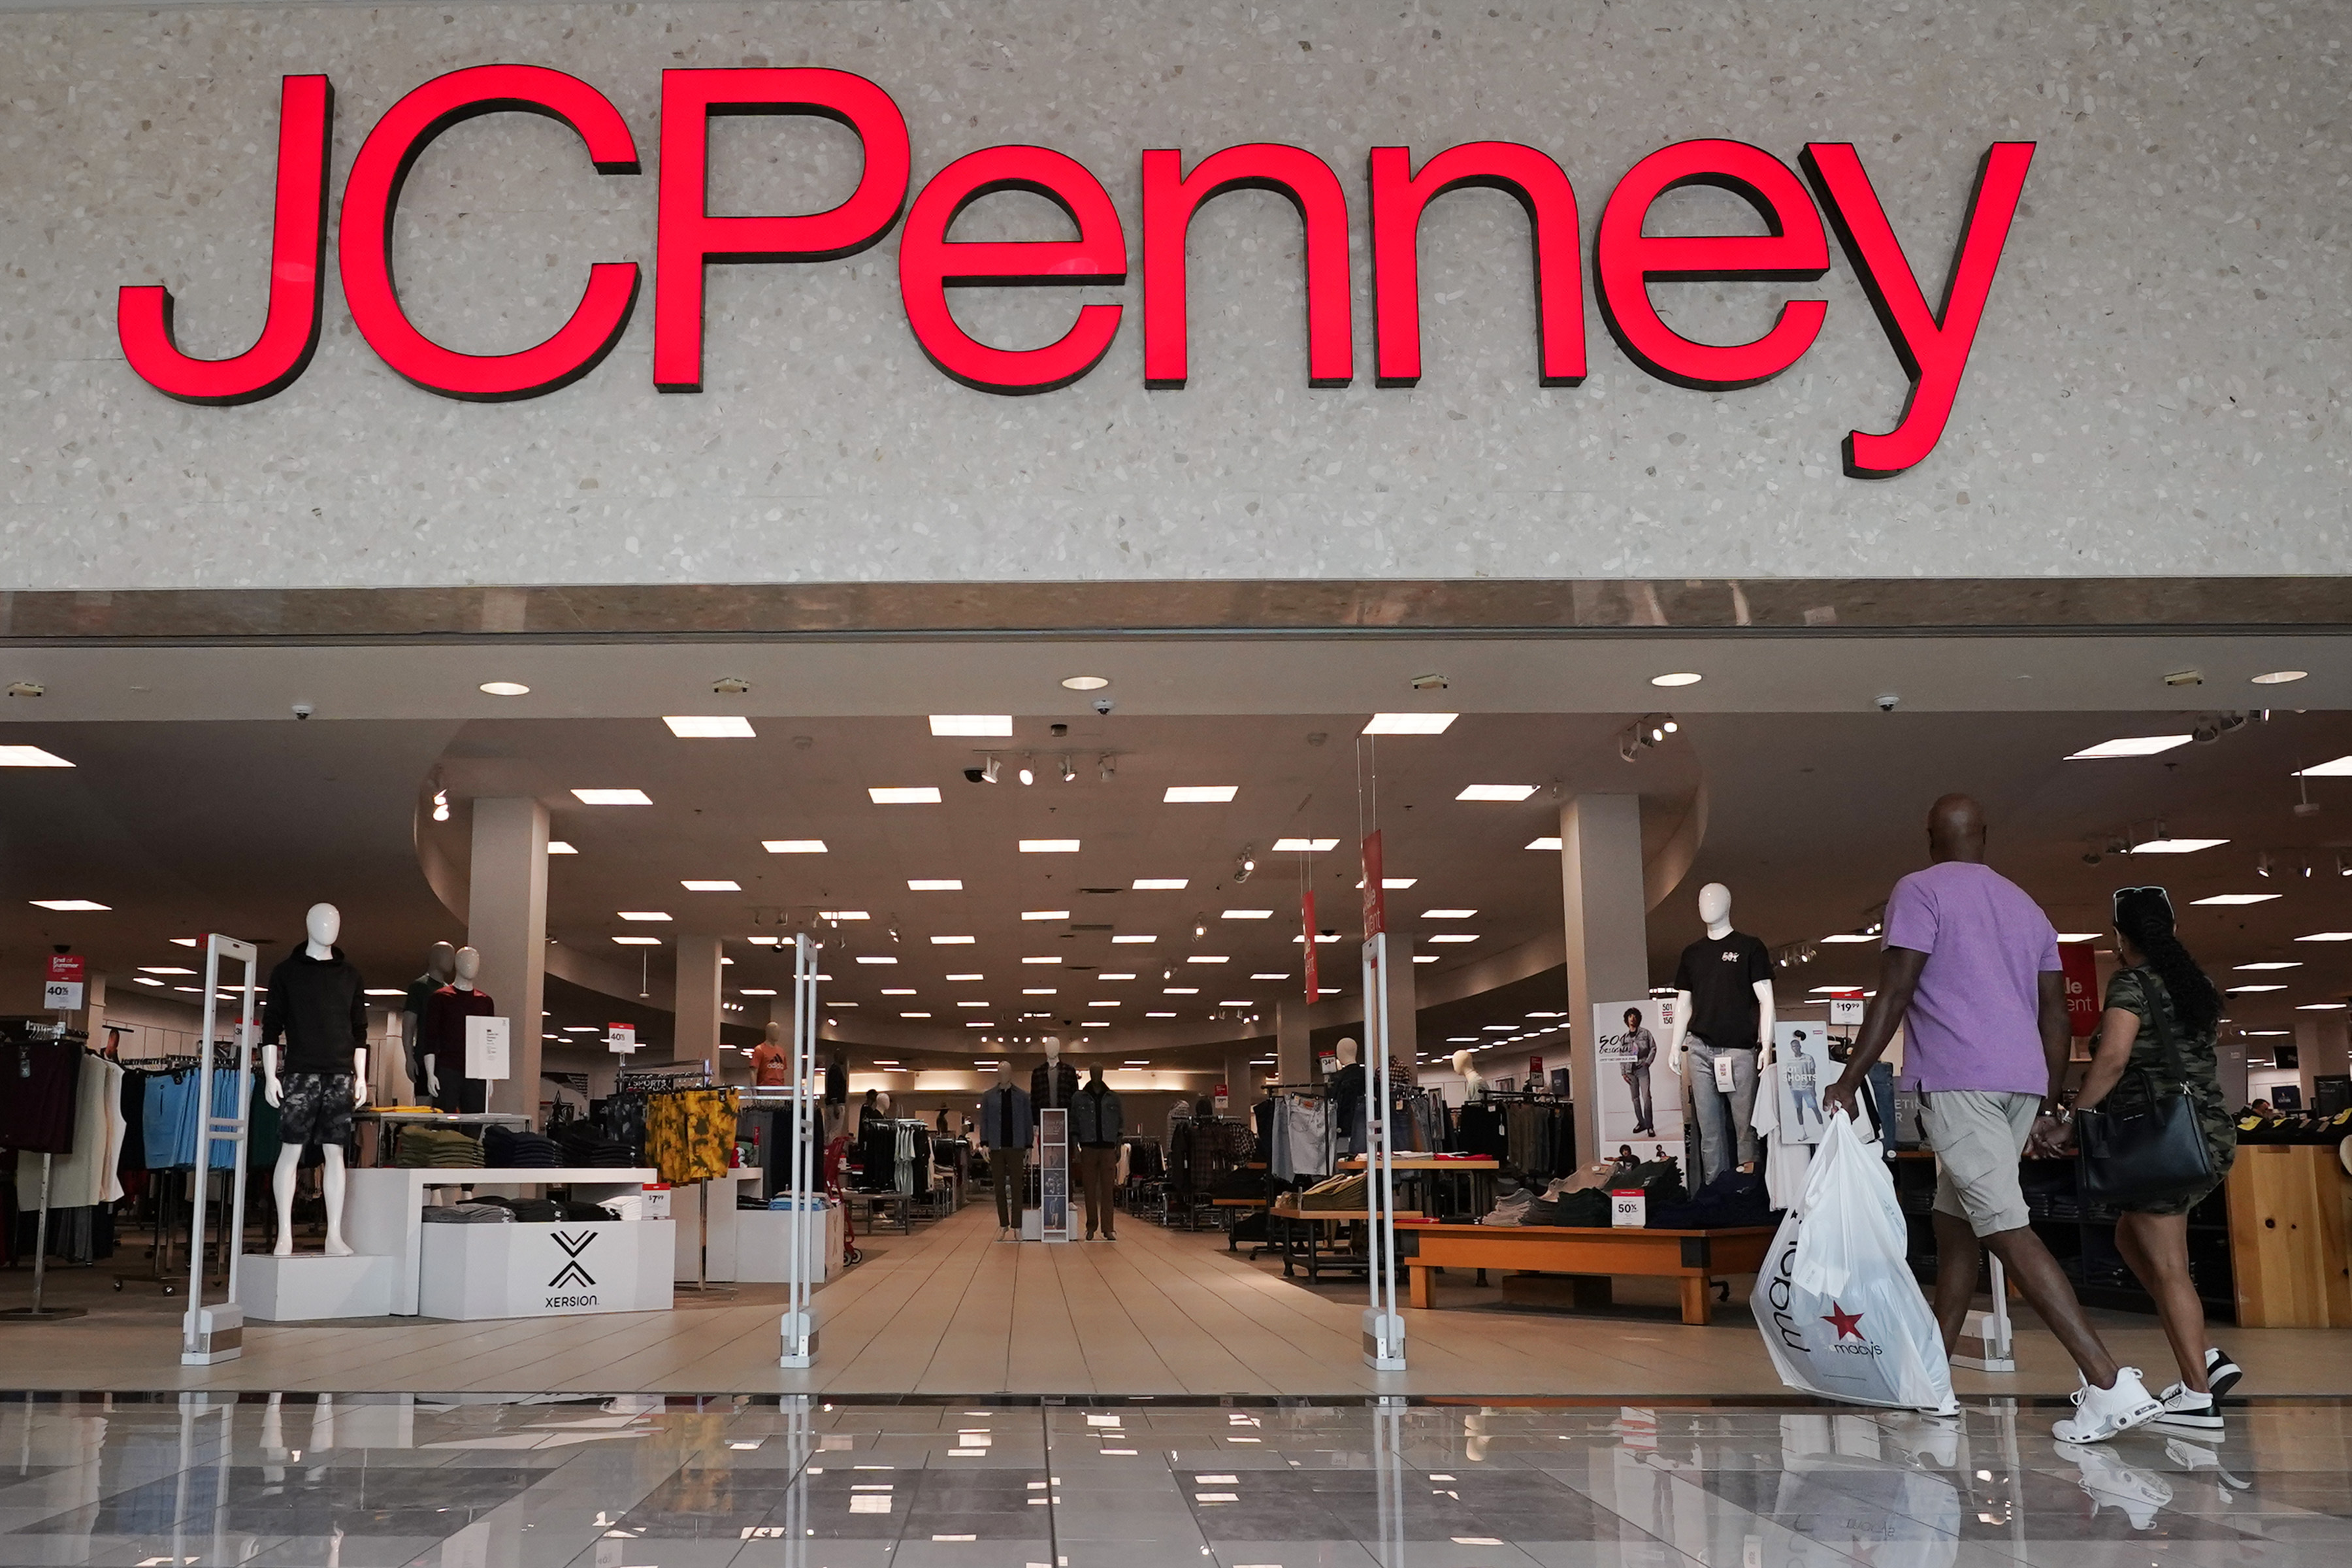 JCPenney Is Closing 6 Stores: See the Full List With Addresses